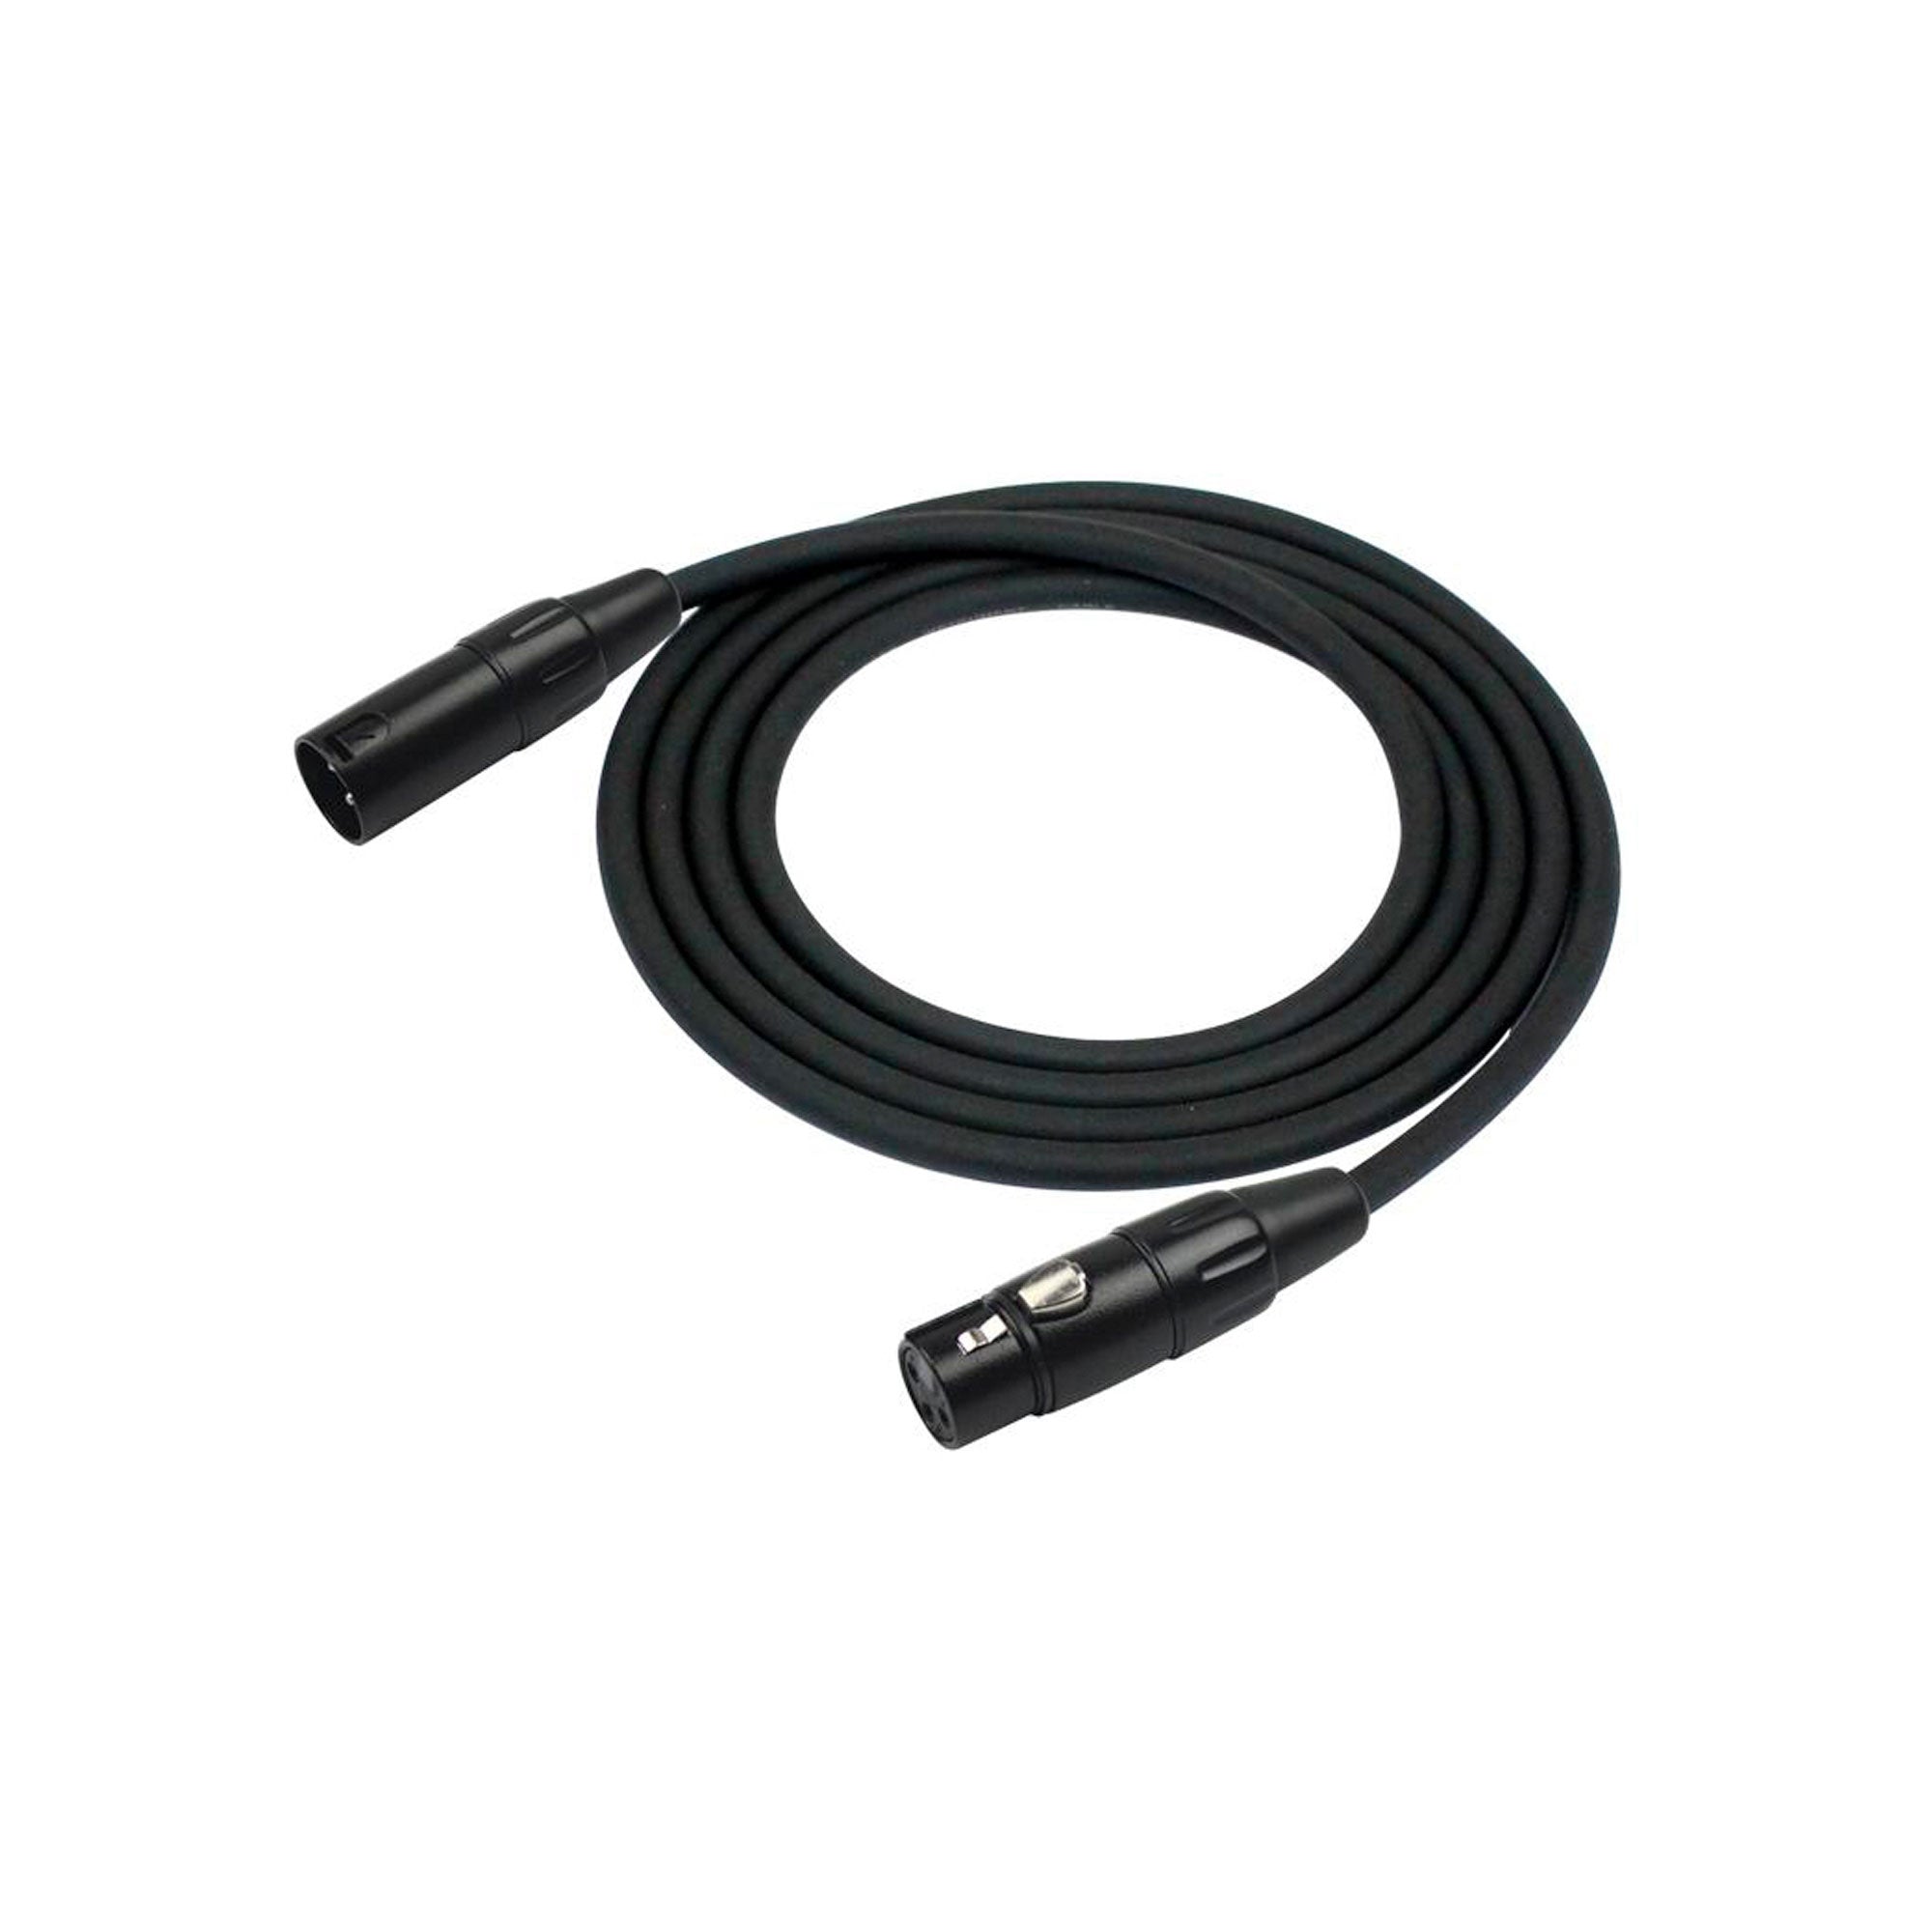 Kirlin Microphone Cable 10M 20AWG XLR M-F Black